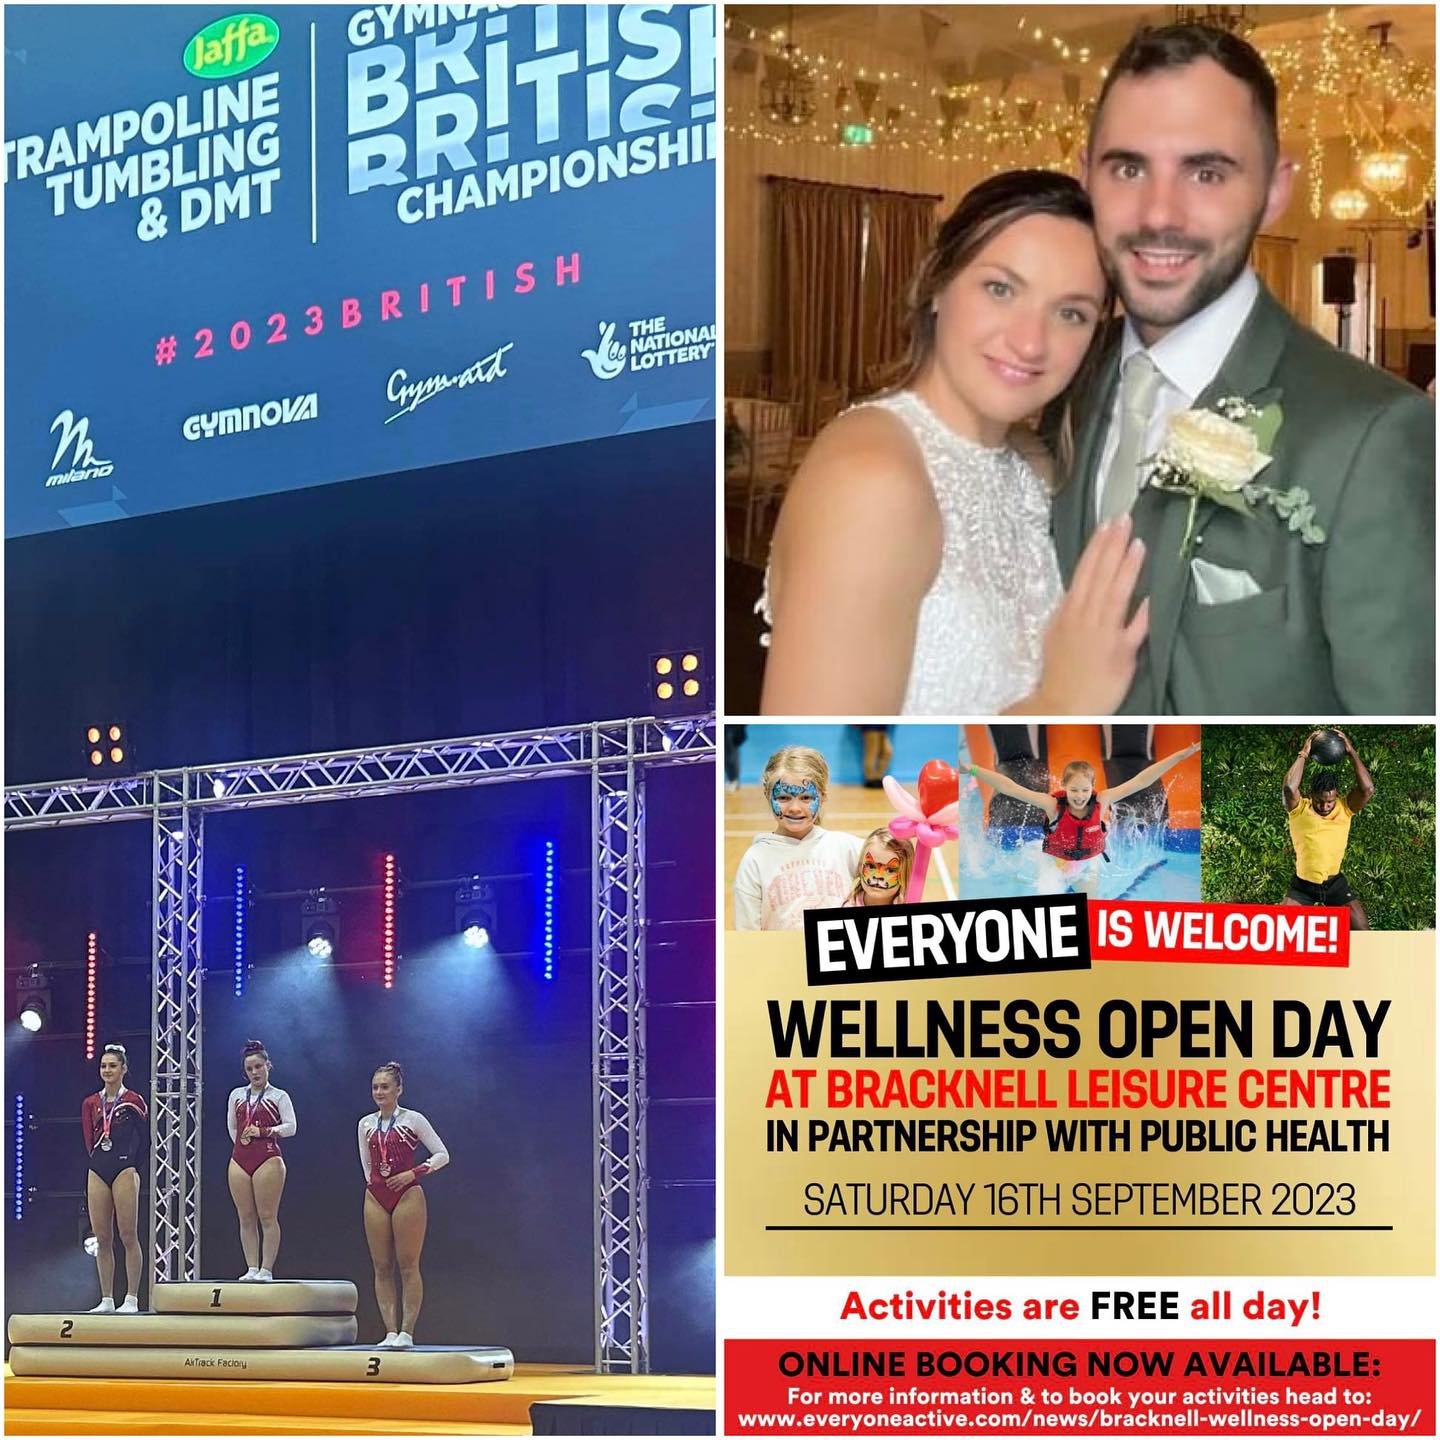 Crazy busy weekend with the @everyoneactive_bracknell and @bfc_health Wellbeing open day, birthday parties, the British DMT Championships and of course, the wedding of James and Stacey 🎊 

Well done to Amelia who picked up a silver medal at the Brit